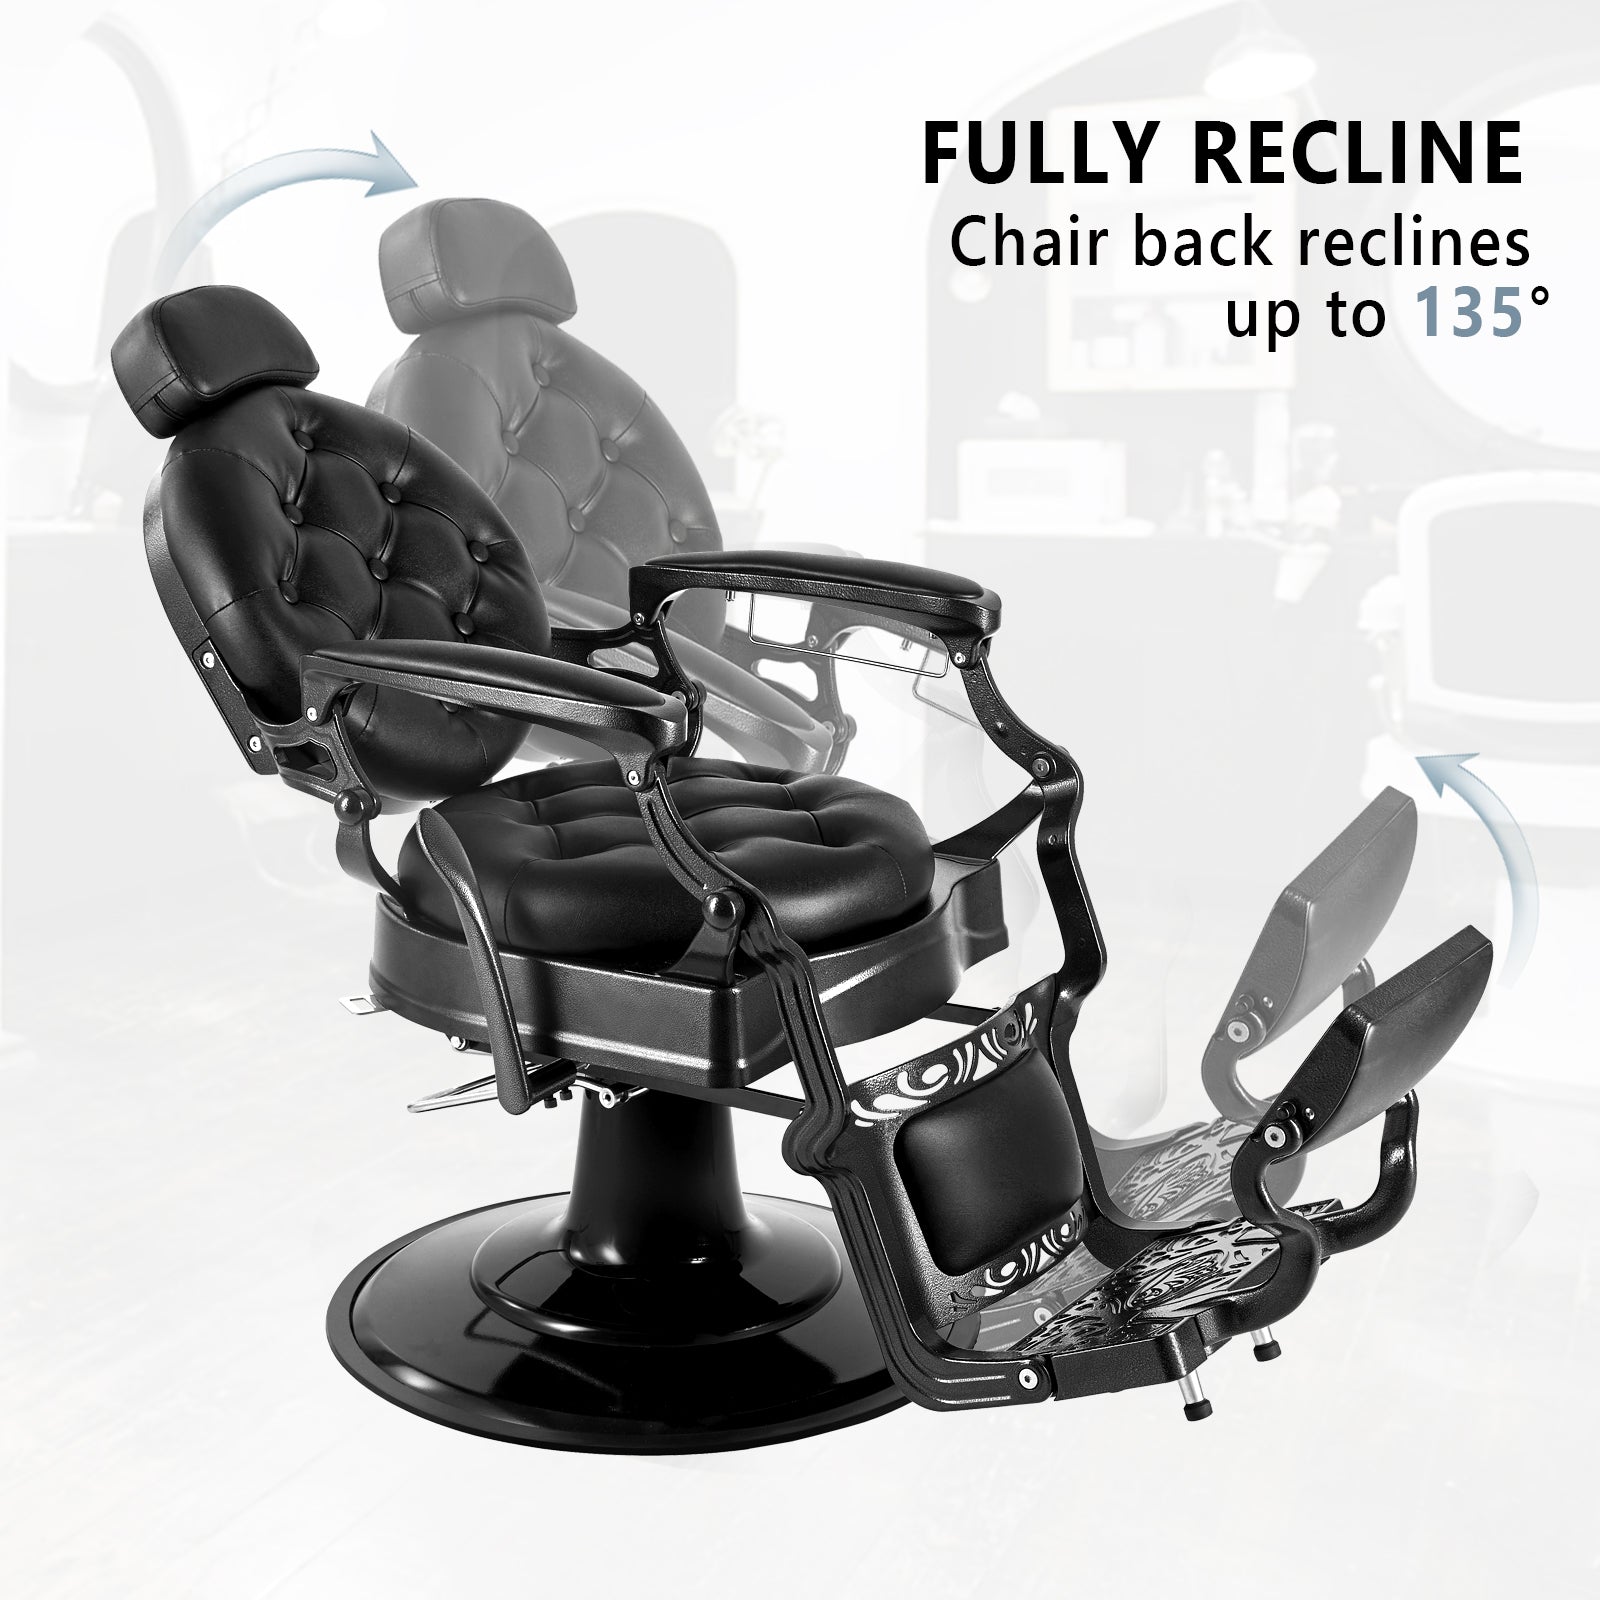 Nails Barber Chair Hairstylist Reclining Professional Cosmetic